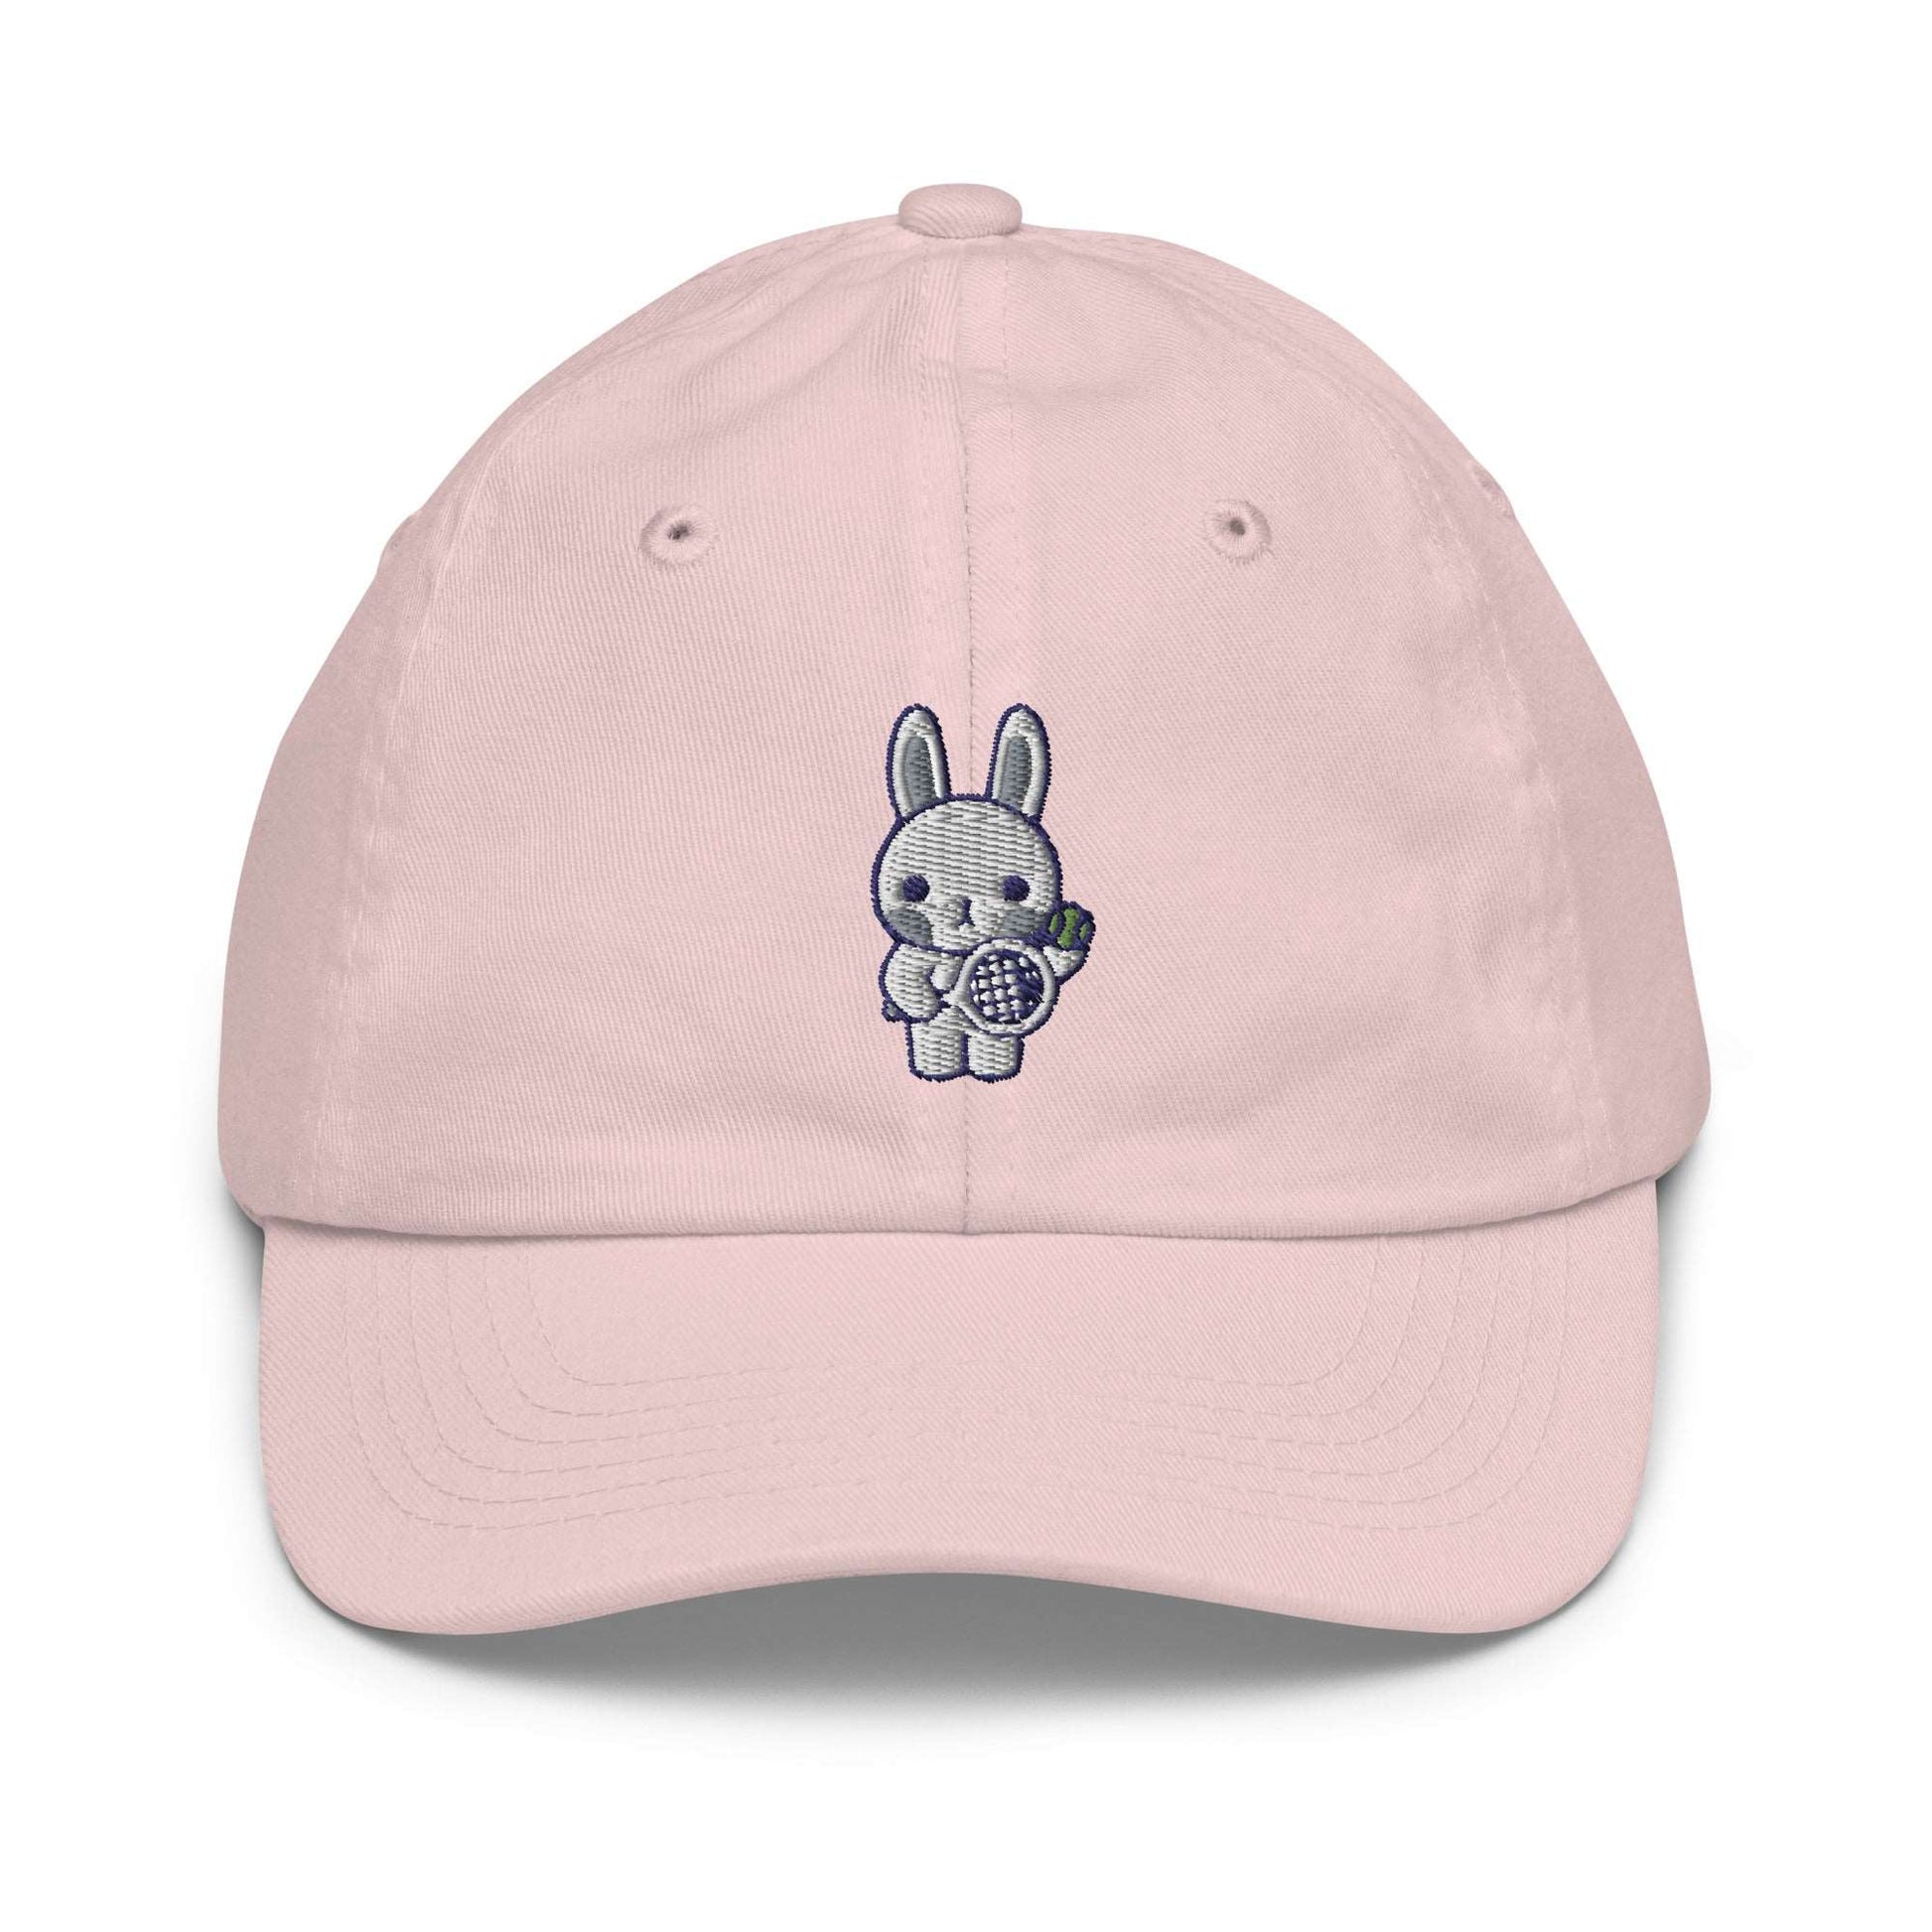 Youth Emma Baseball Cap - Available in Blue, White, Pink - TOKKITENNIS